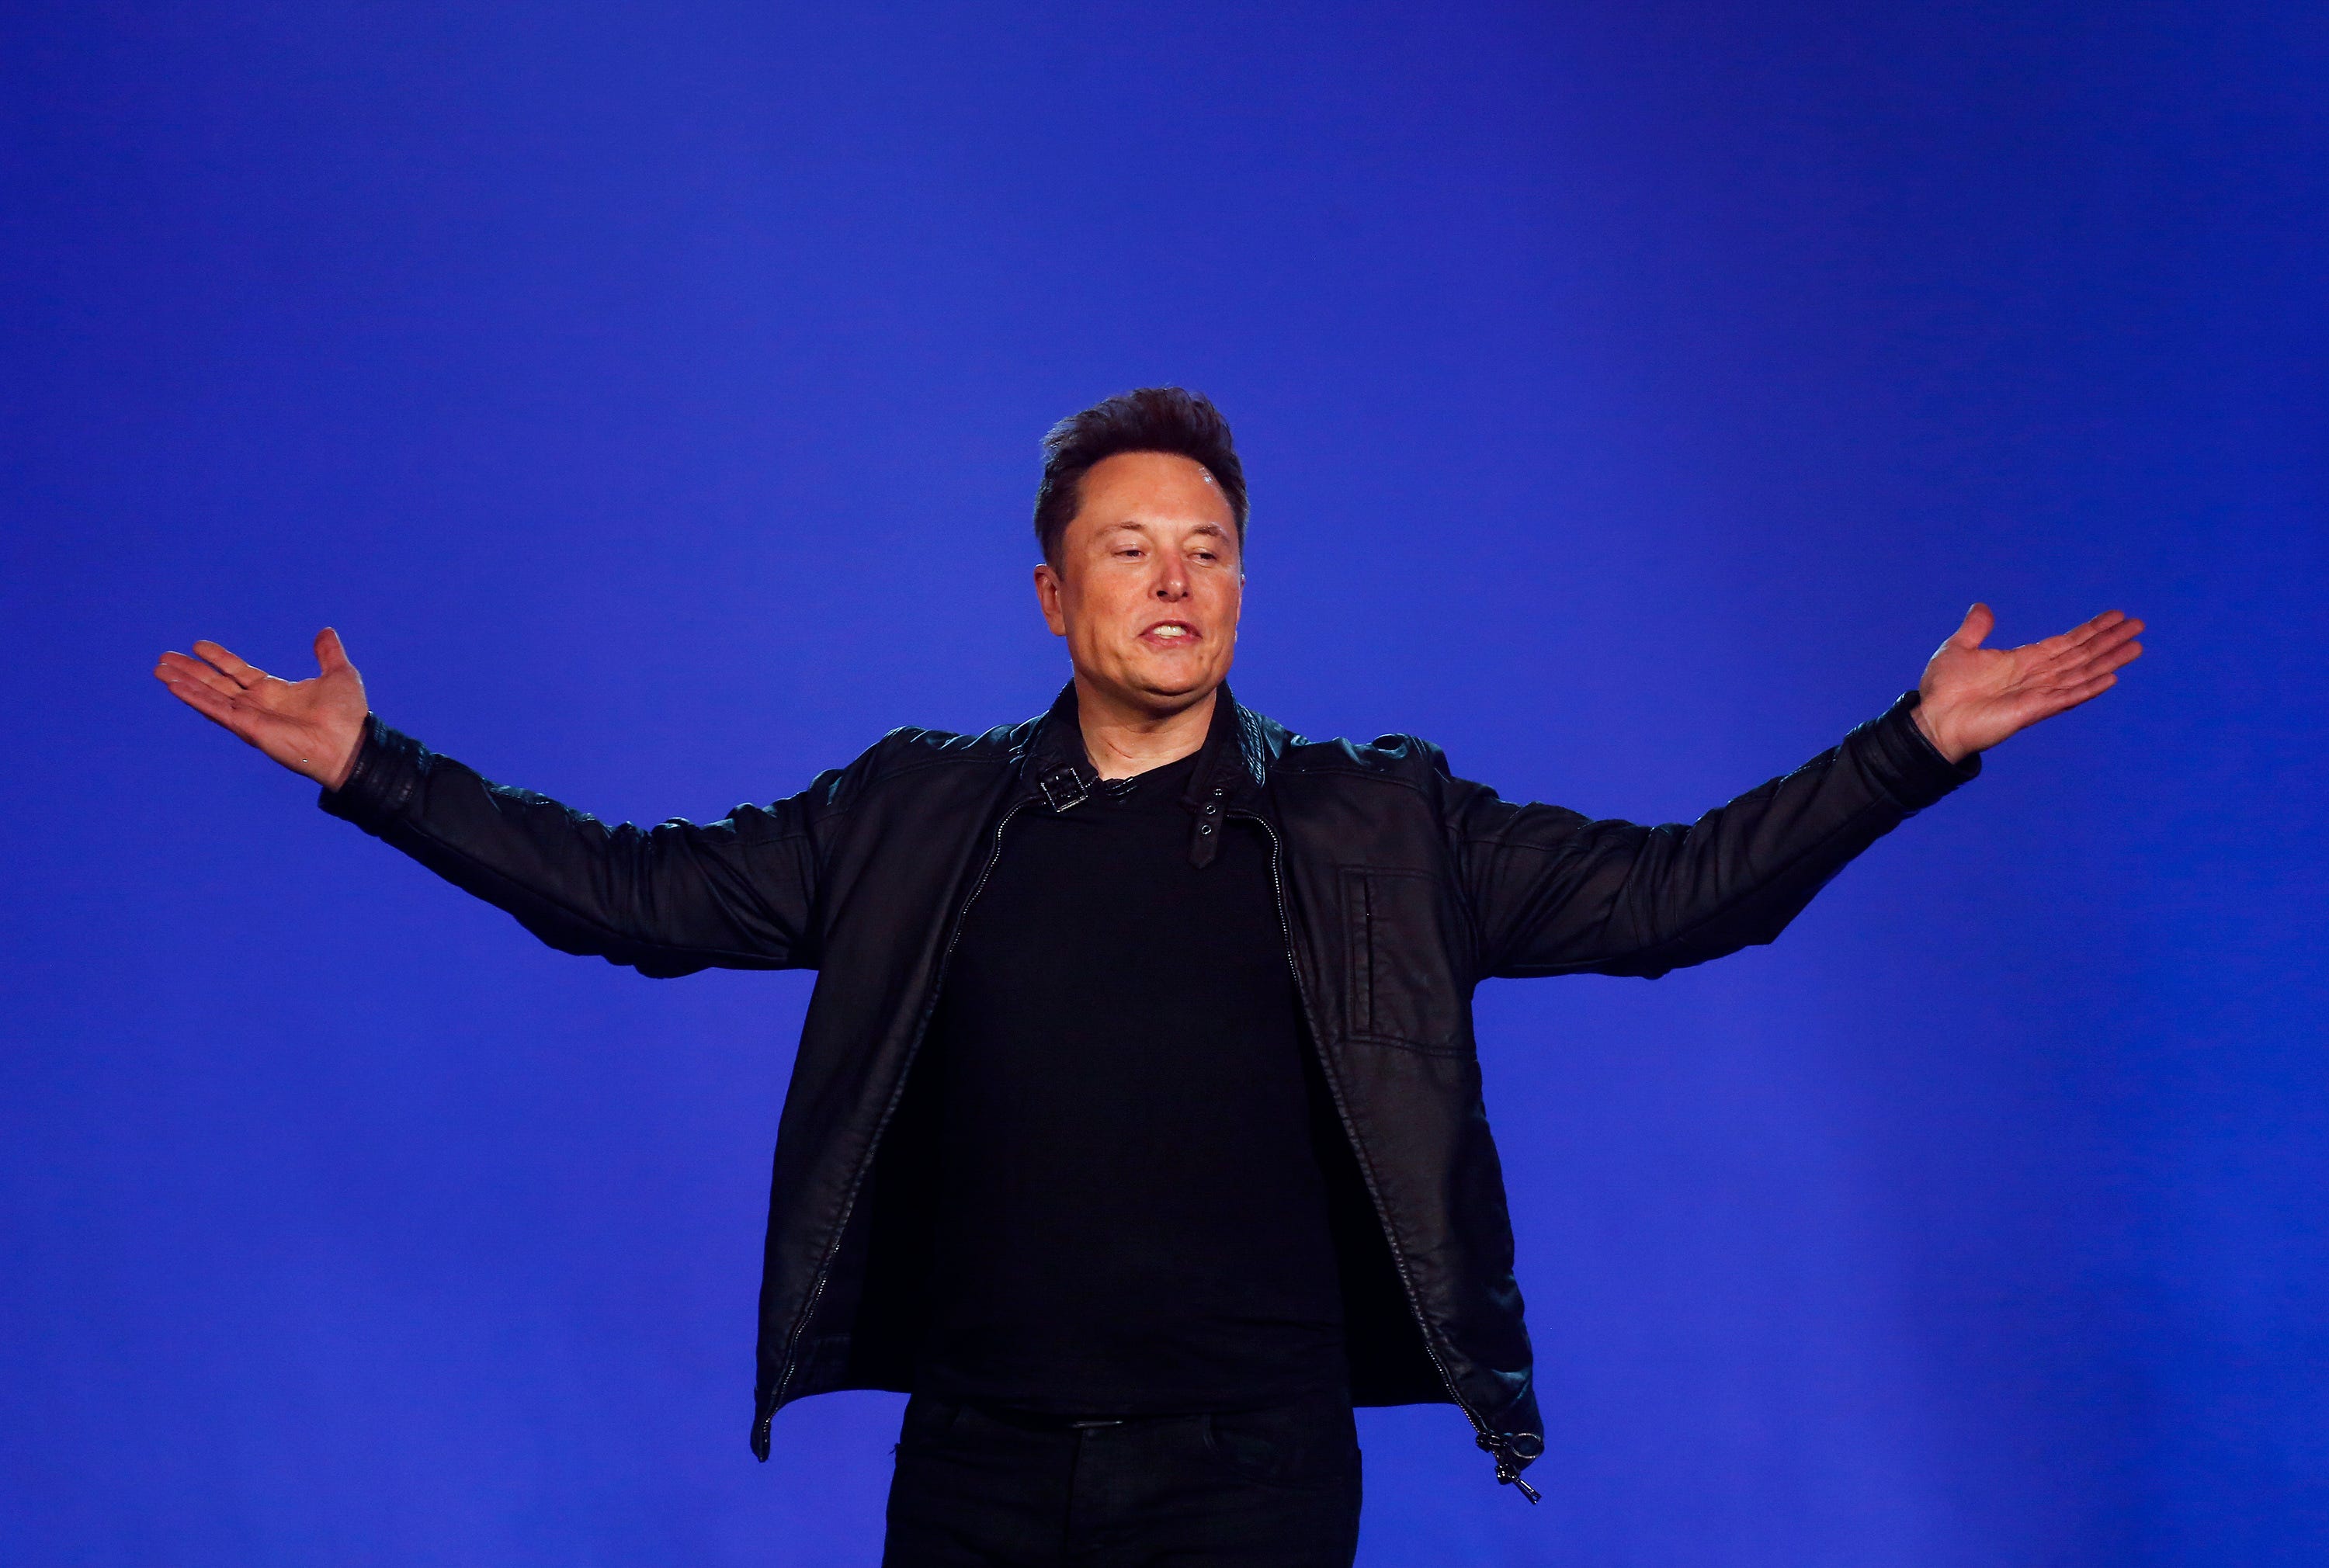 Tesla CEO Elon Musk introduces the Cybertruck at Tesla's design studio in Hawthorne, Calif. Musk is taking on the workhorse heavy pickup truck market with his latest electric vehicle.